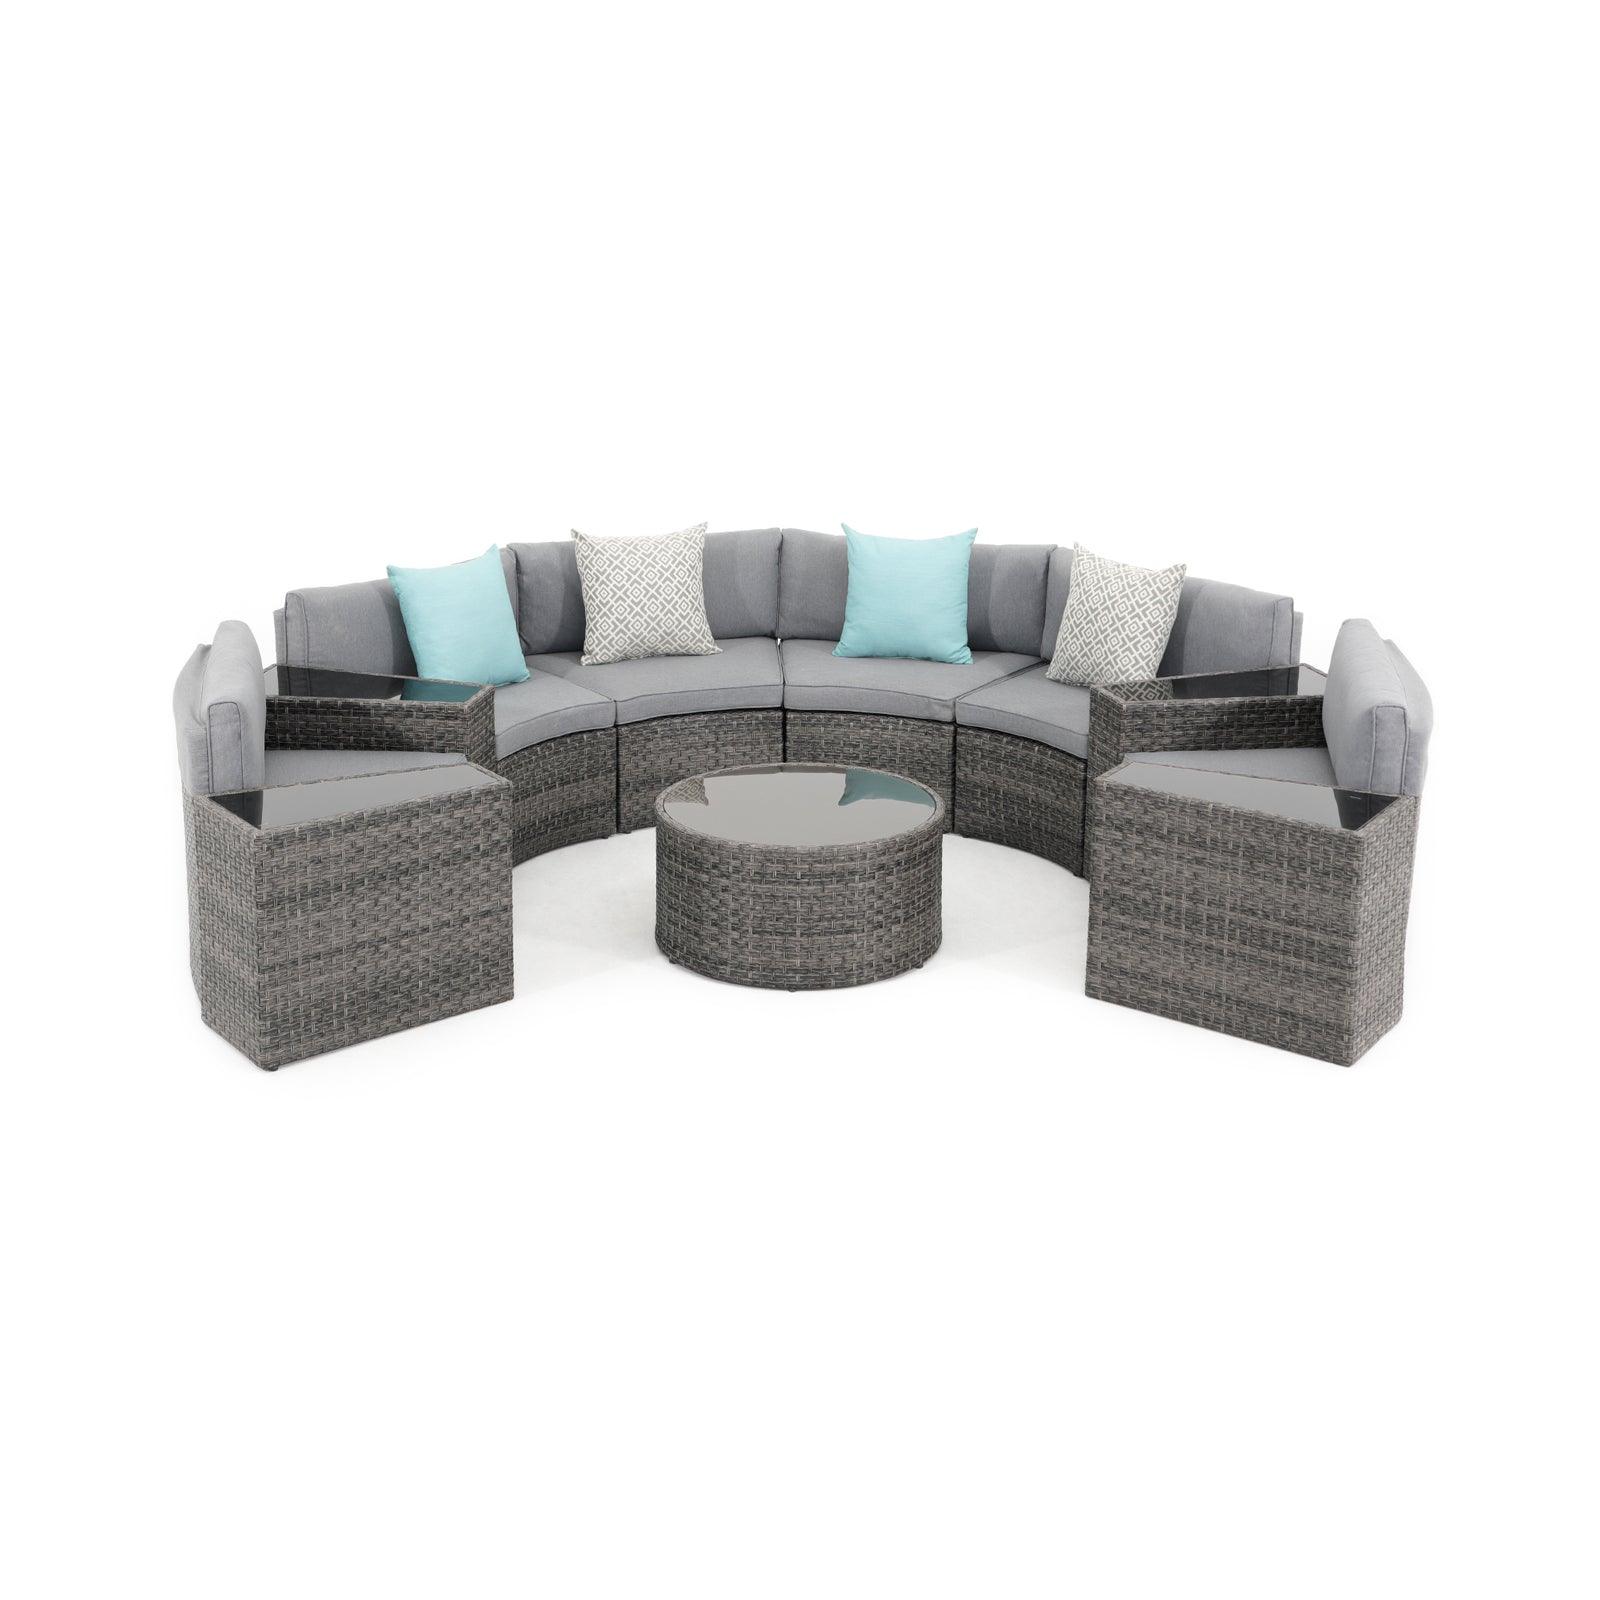 Boboli Modern Wicker Outdoor Furniture, 11-piece Grey Wicker Curved Sectional Set with grey cushions, 1 Round Glass Table, 4 side tables, 6 sectional sofas, front- Jardina Furniture